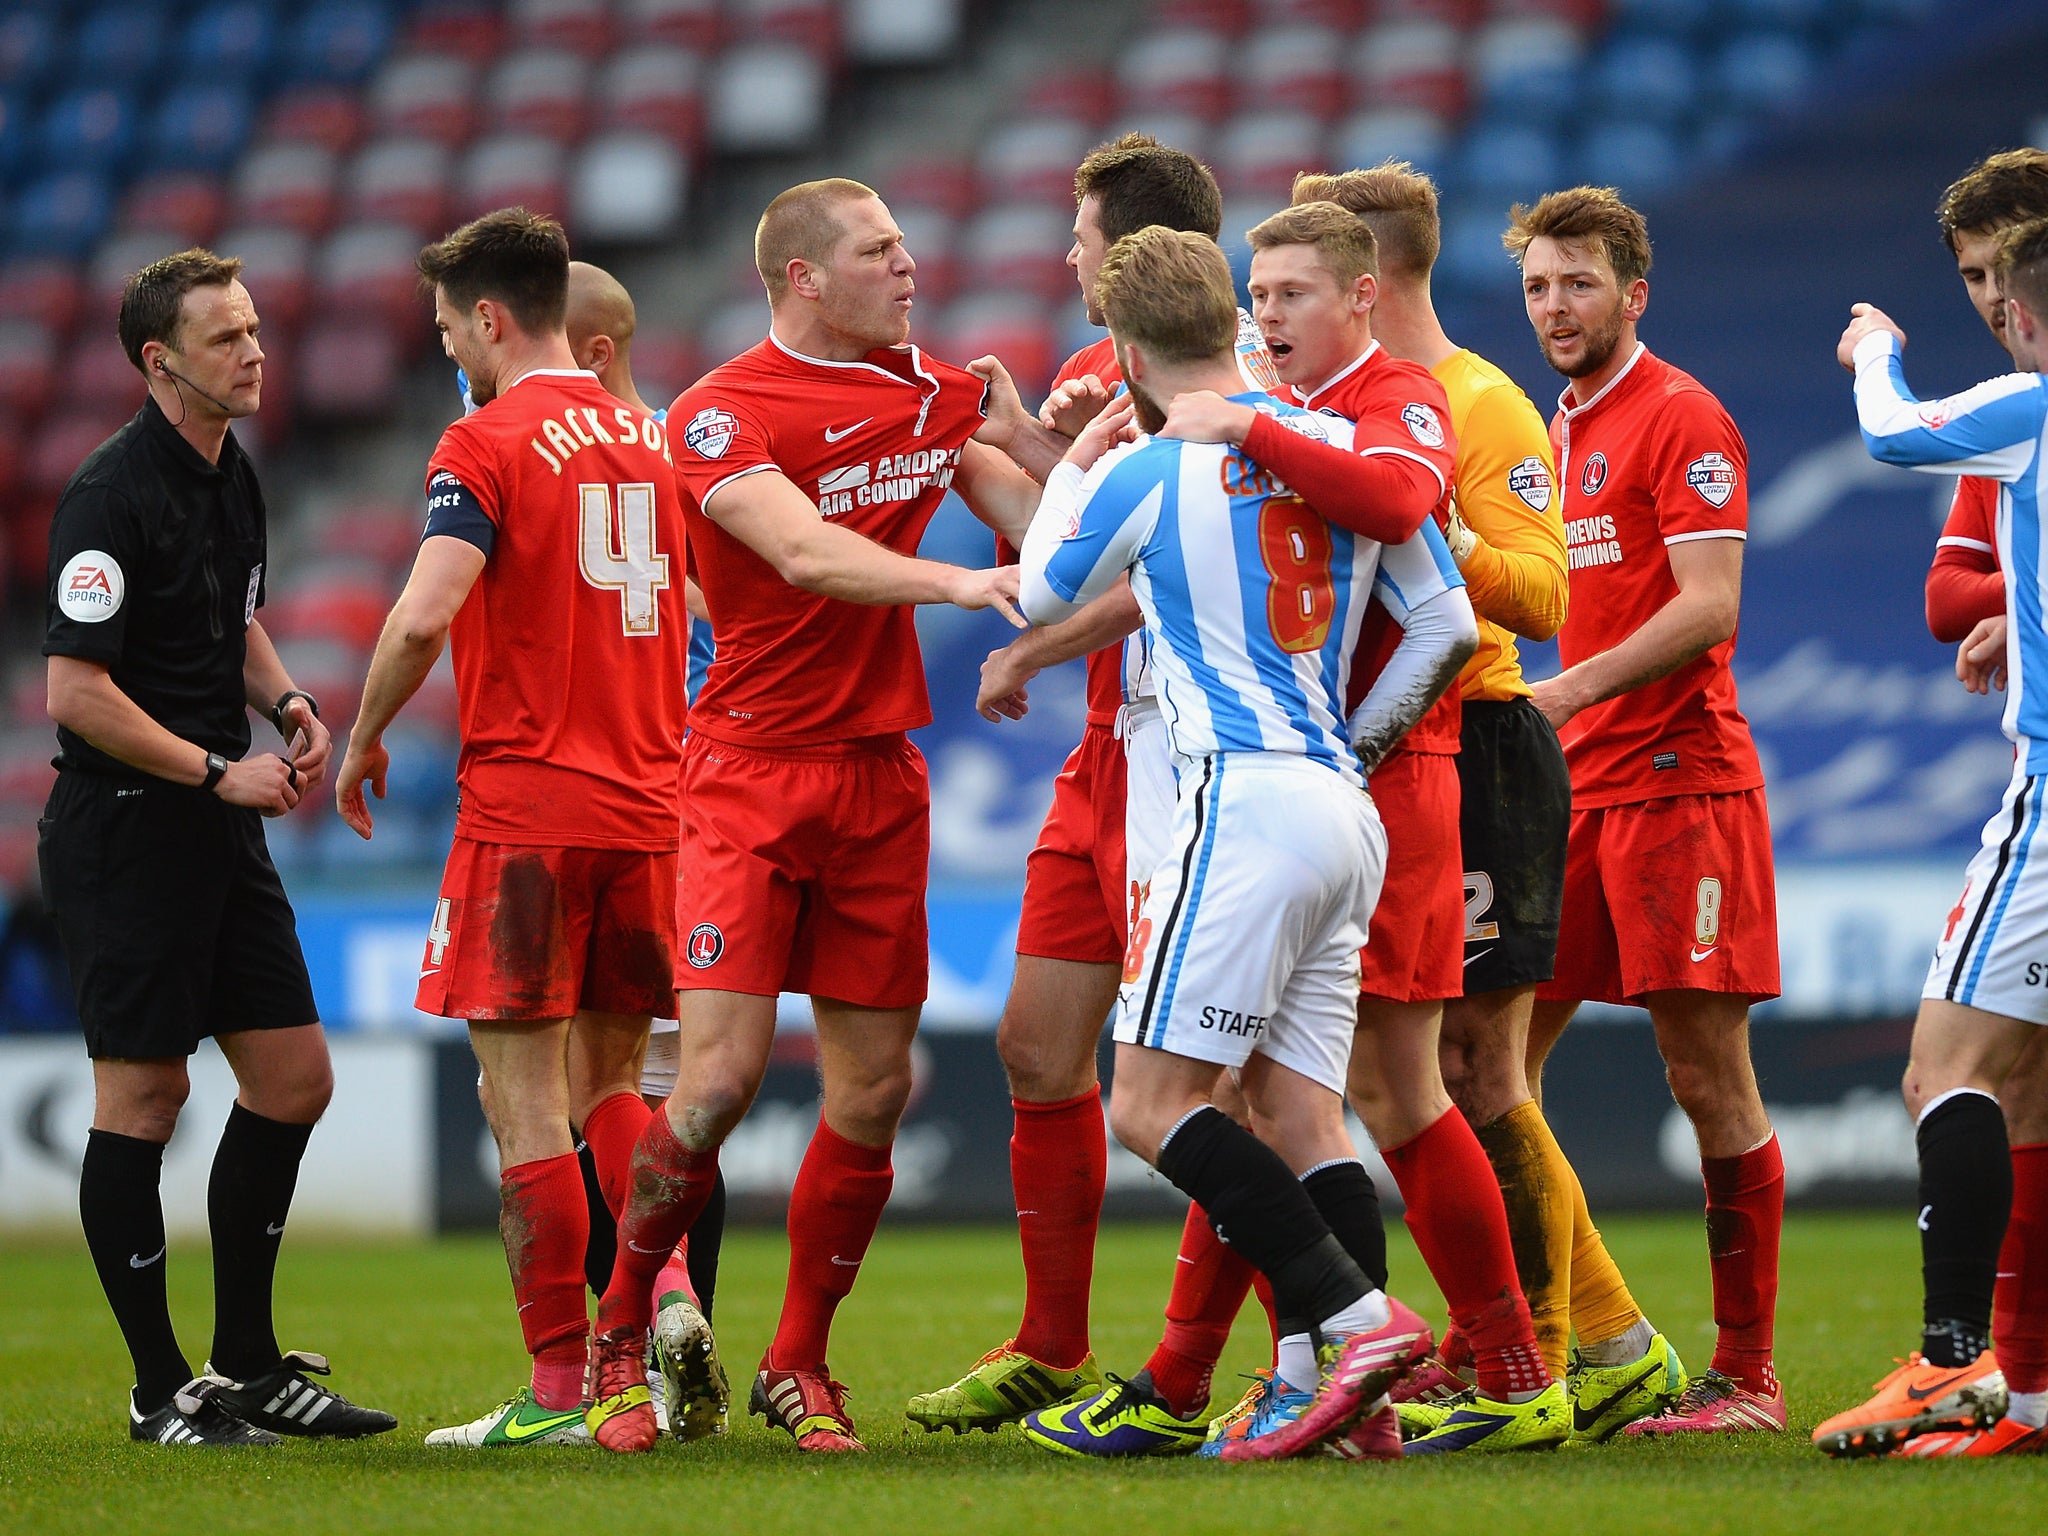 Charlton and Huddersfield player clash during the FA Cup fourth round fixture